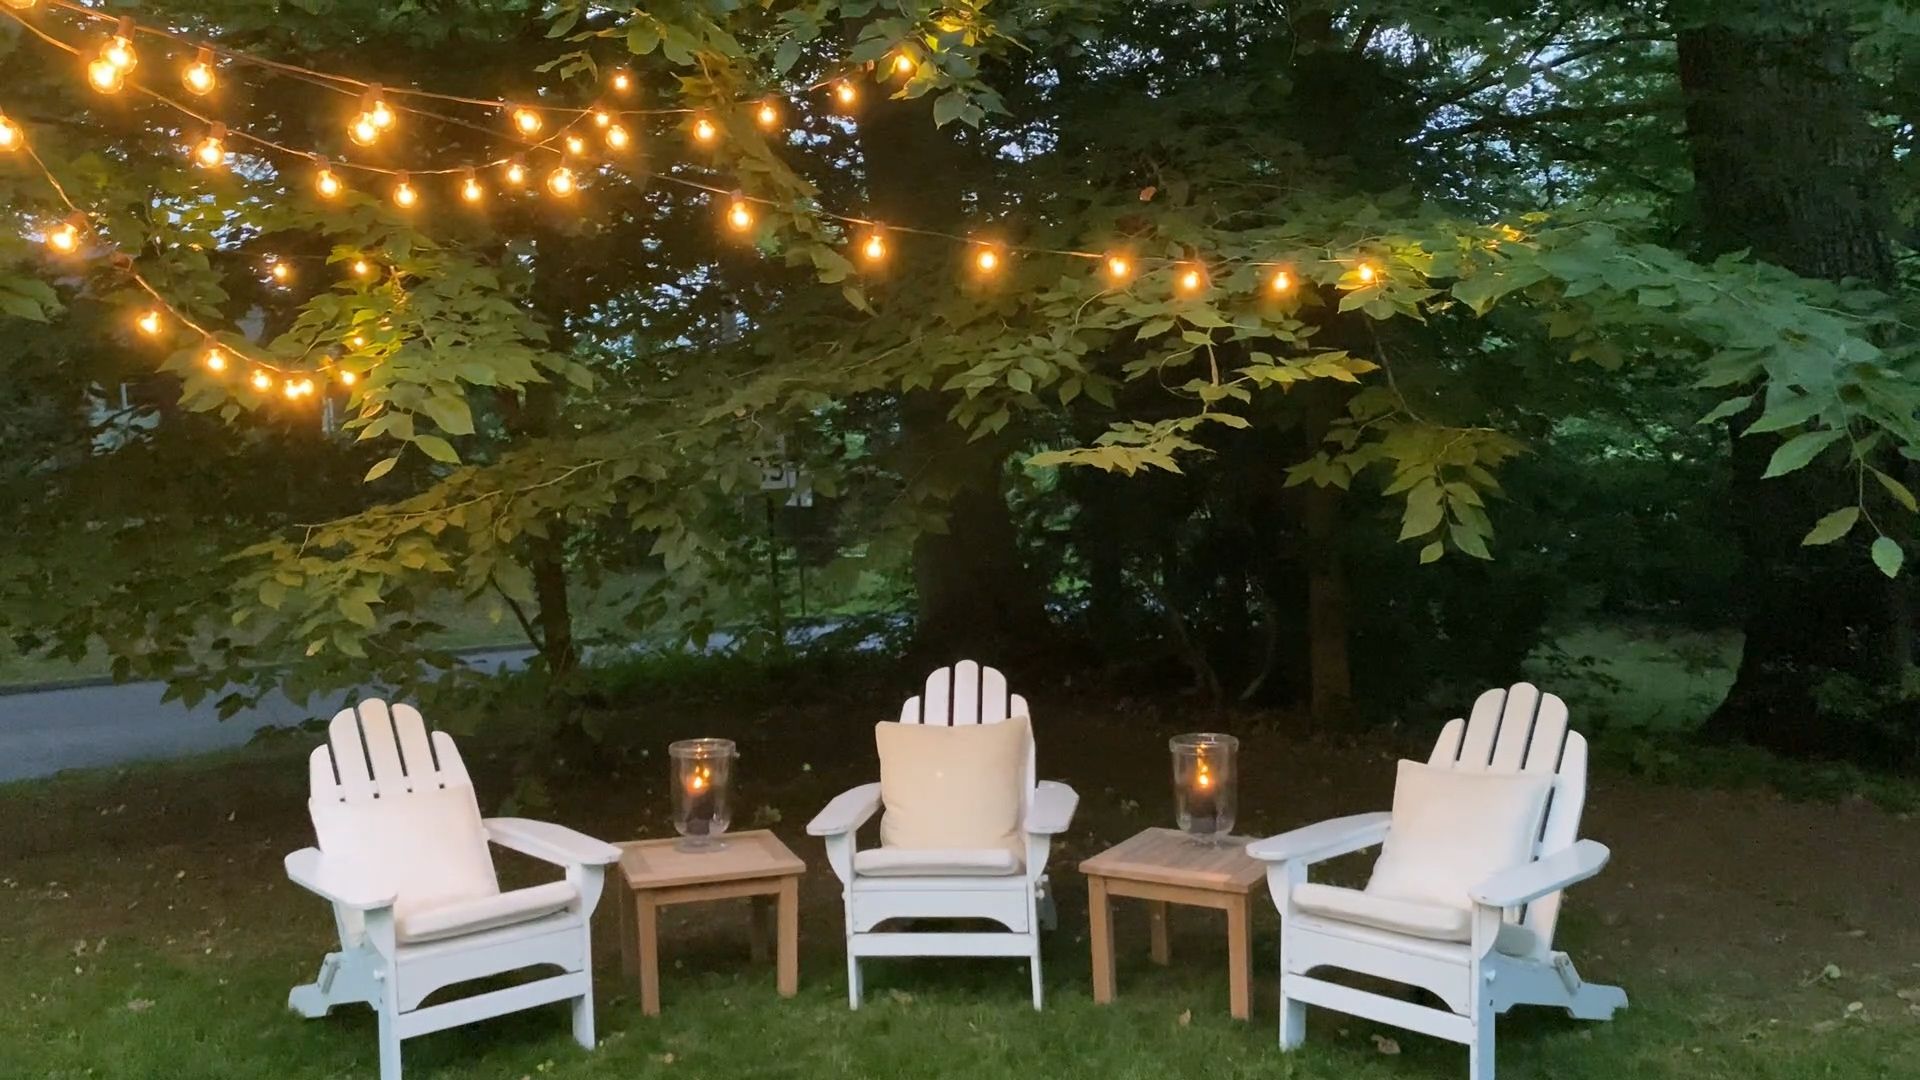 How to Hang String Lights for a Backyard String Lights